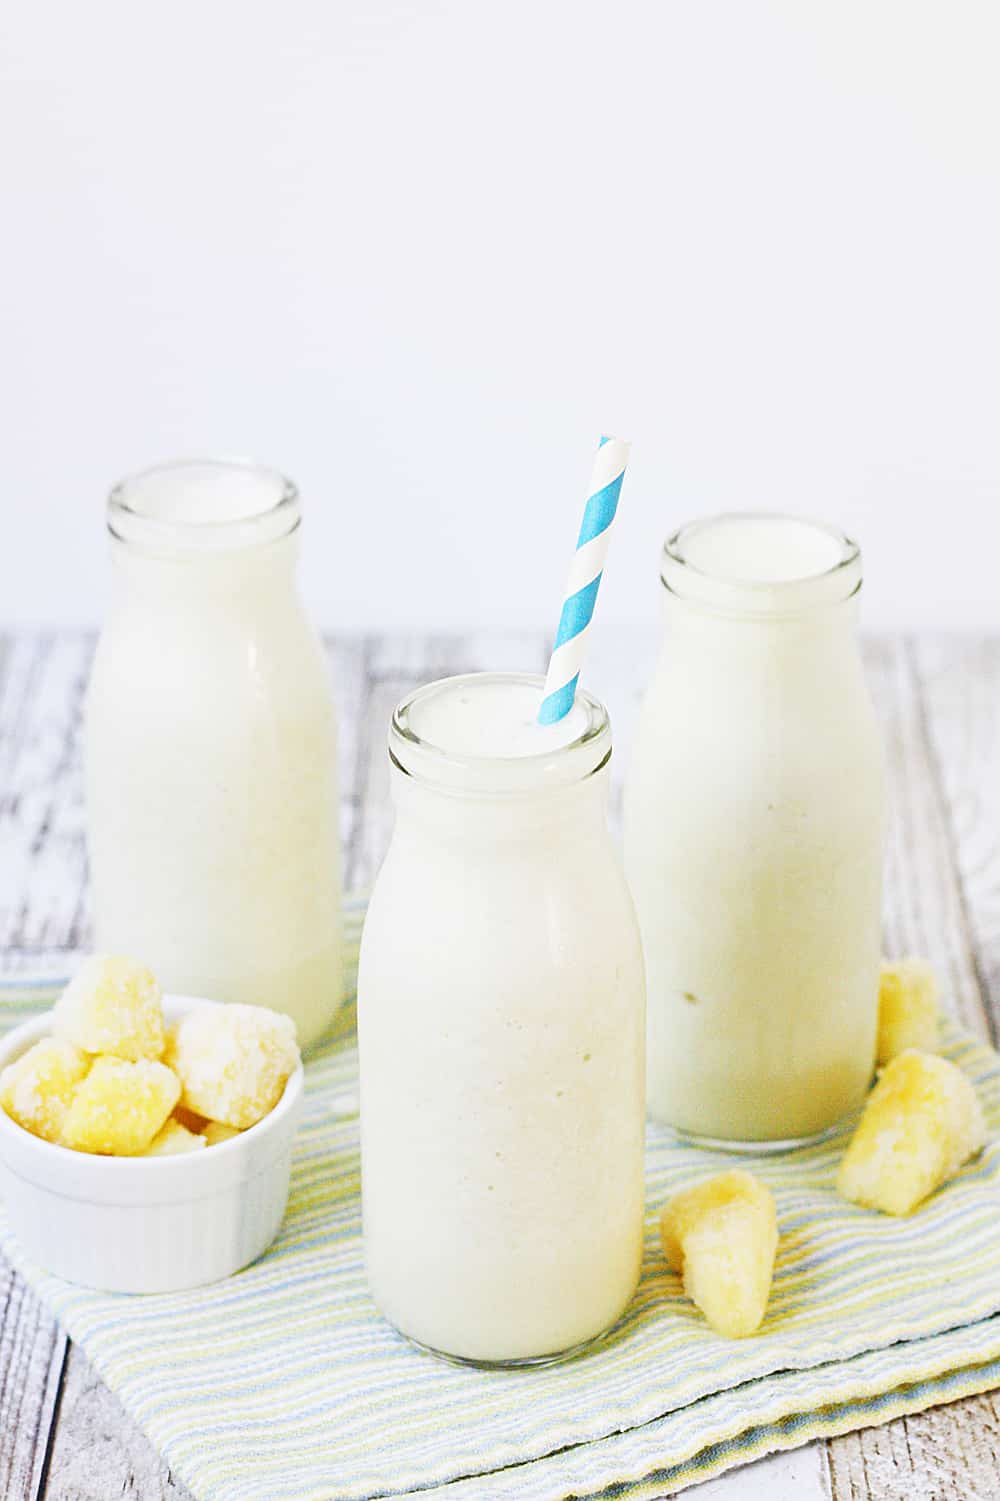 Pina Colada Protein Smoothie - This pina colada protein smoothie is an easy, healthy, delicious, protein-packed way to enjoy your favorite tropical beverage! #halfscratched #pinacolada #smoothie #proteinshake #proteinsmoothie #smoothierecipe #drinkrecipe #drink #healthyrecipe #healthy #pinacoladashake